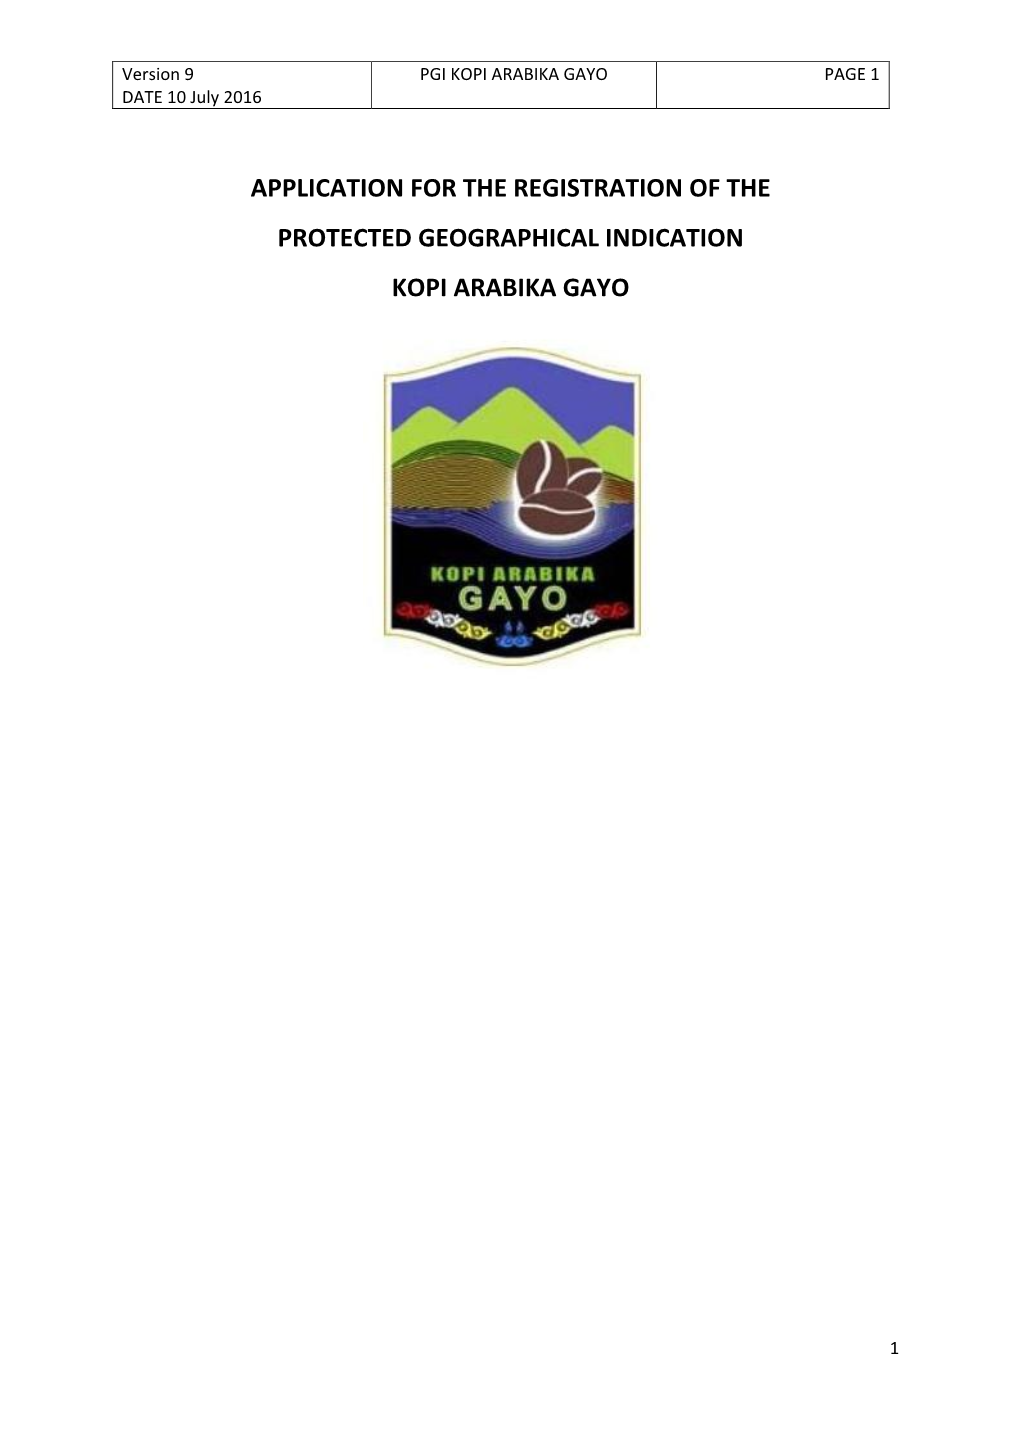 Application for the Registration of the Protected Geographical Indication